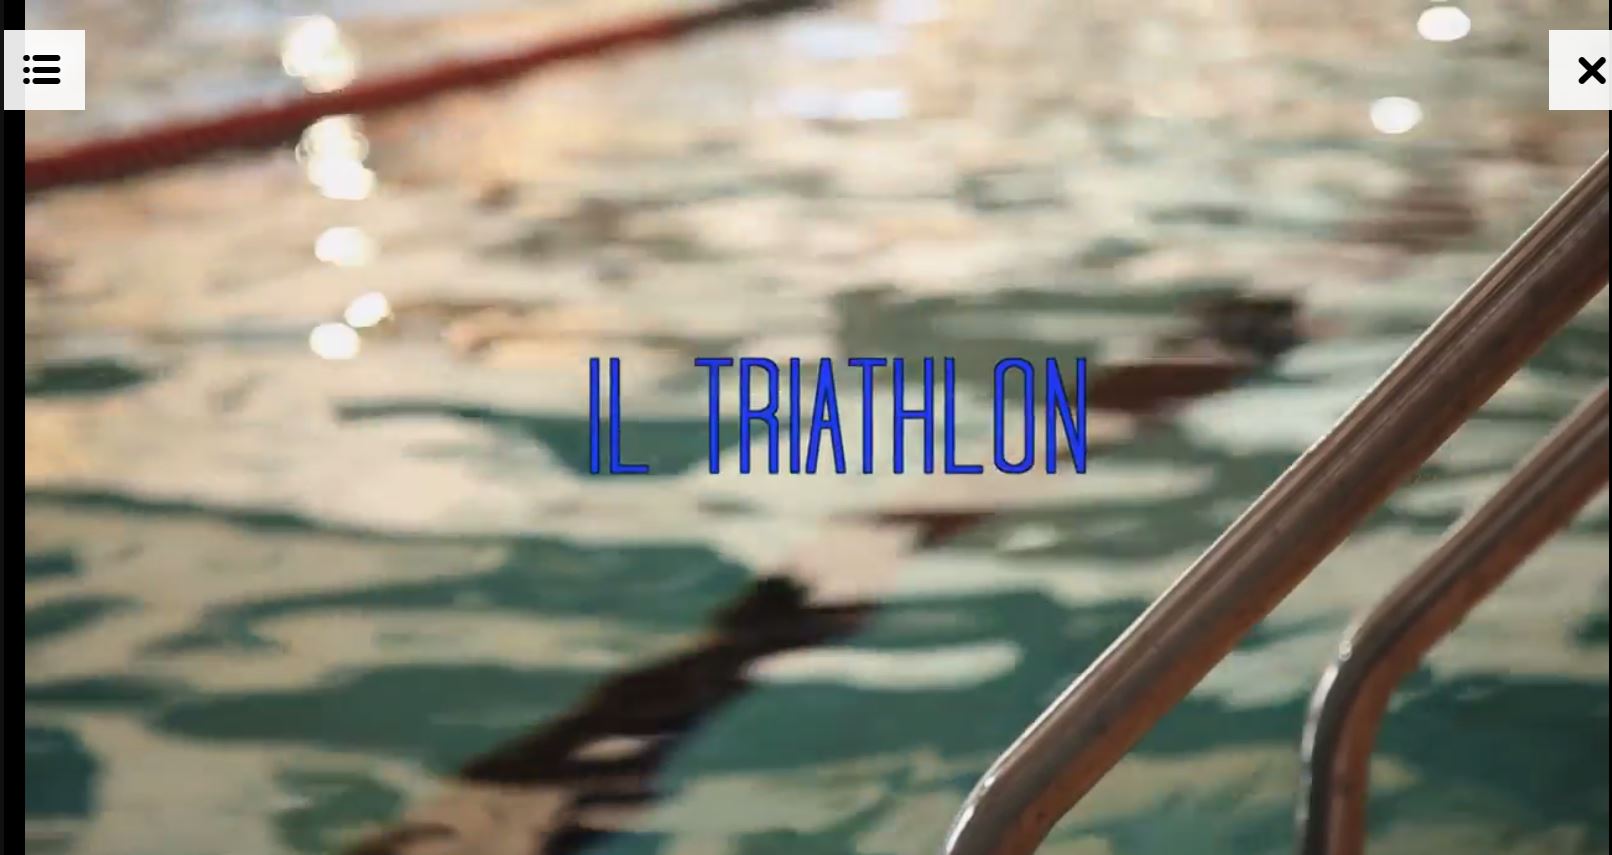 images/2016/News_2016/varie/home_page_coni_il_triathlon.JPG